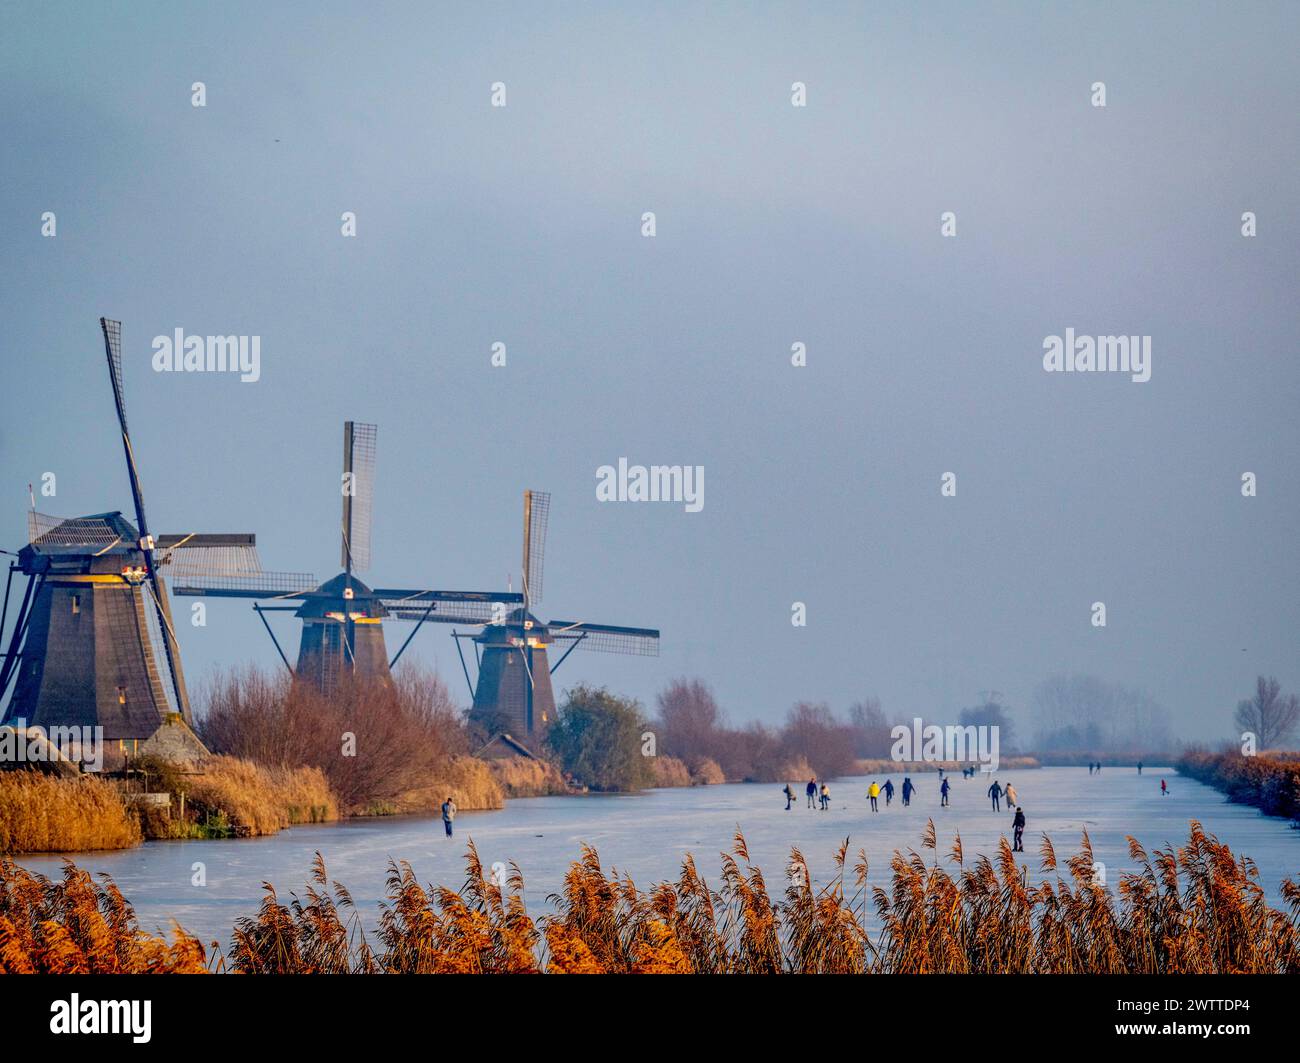 Skaters glide across a frozen canal with traditional windmills in the backdrop at dusk Stock Photo